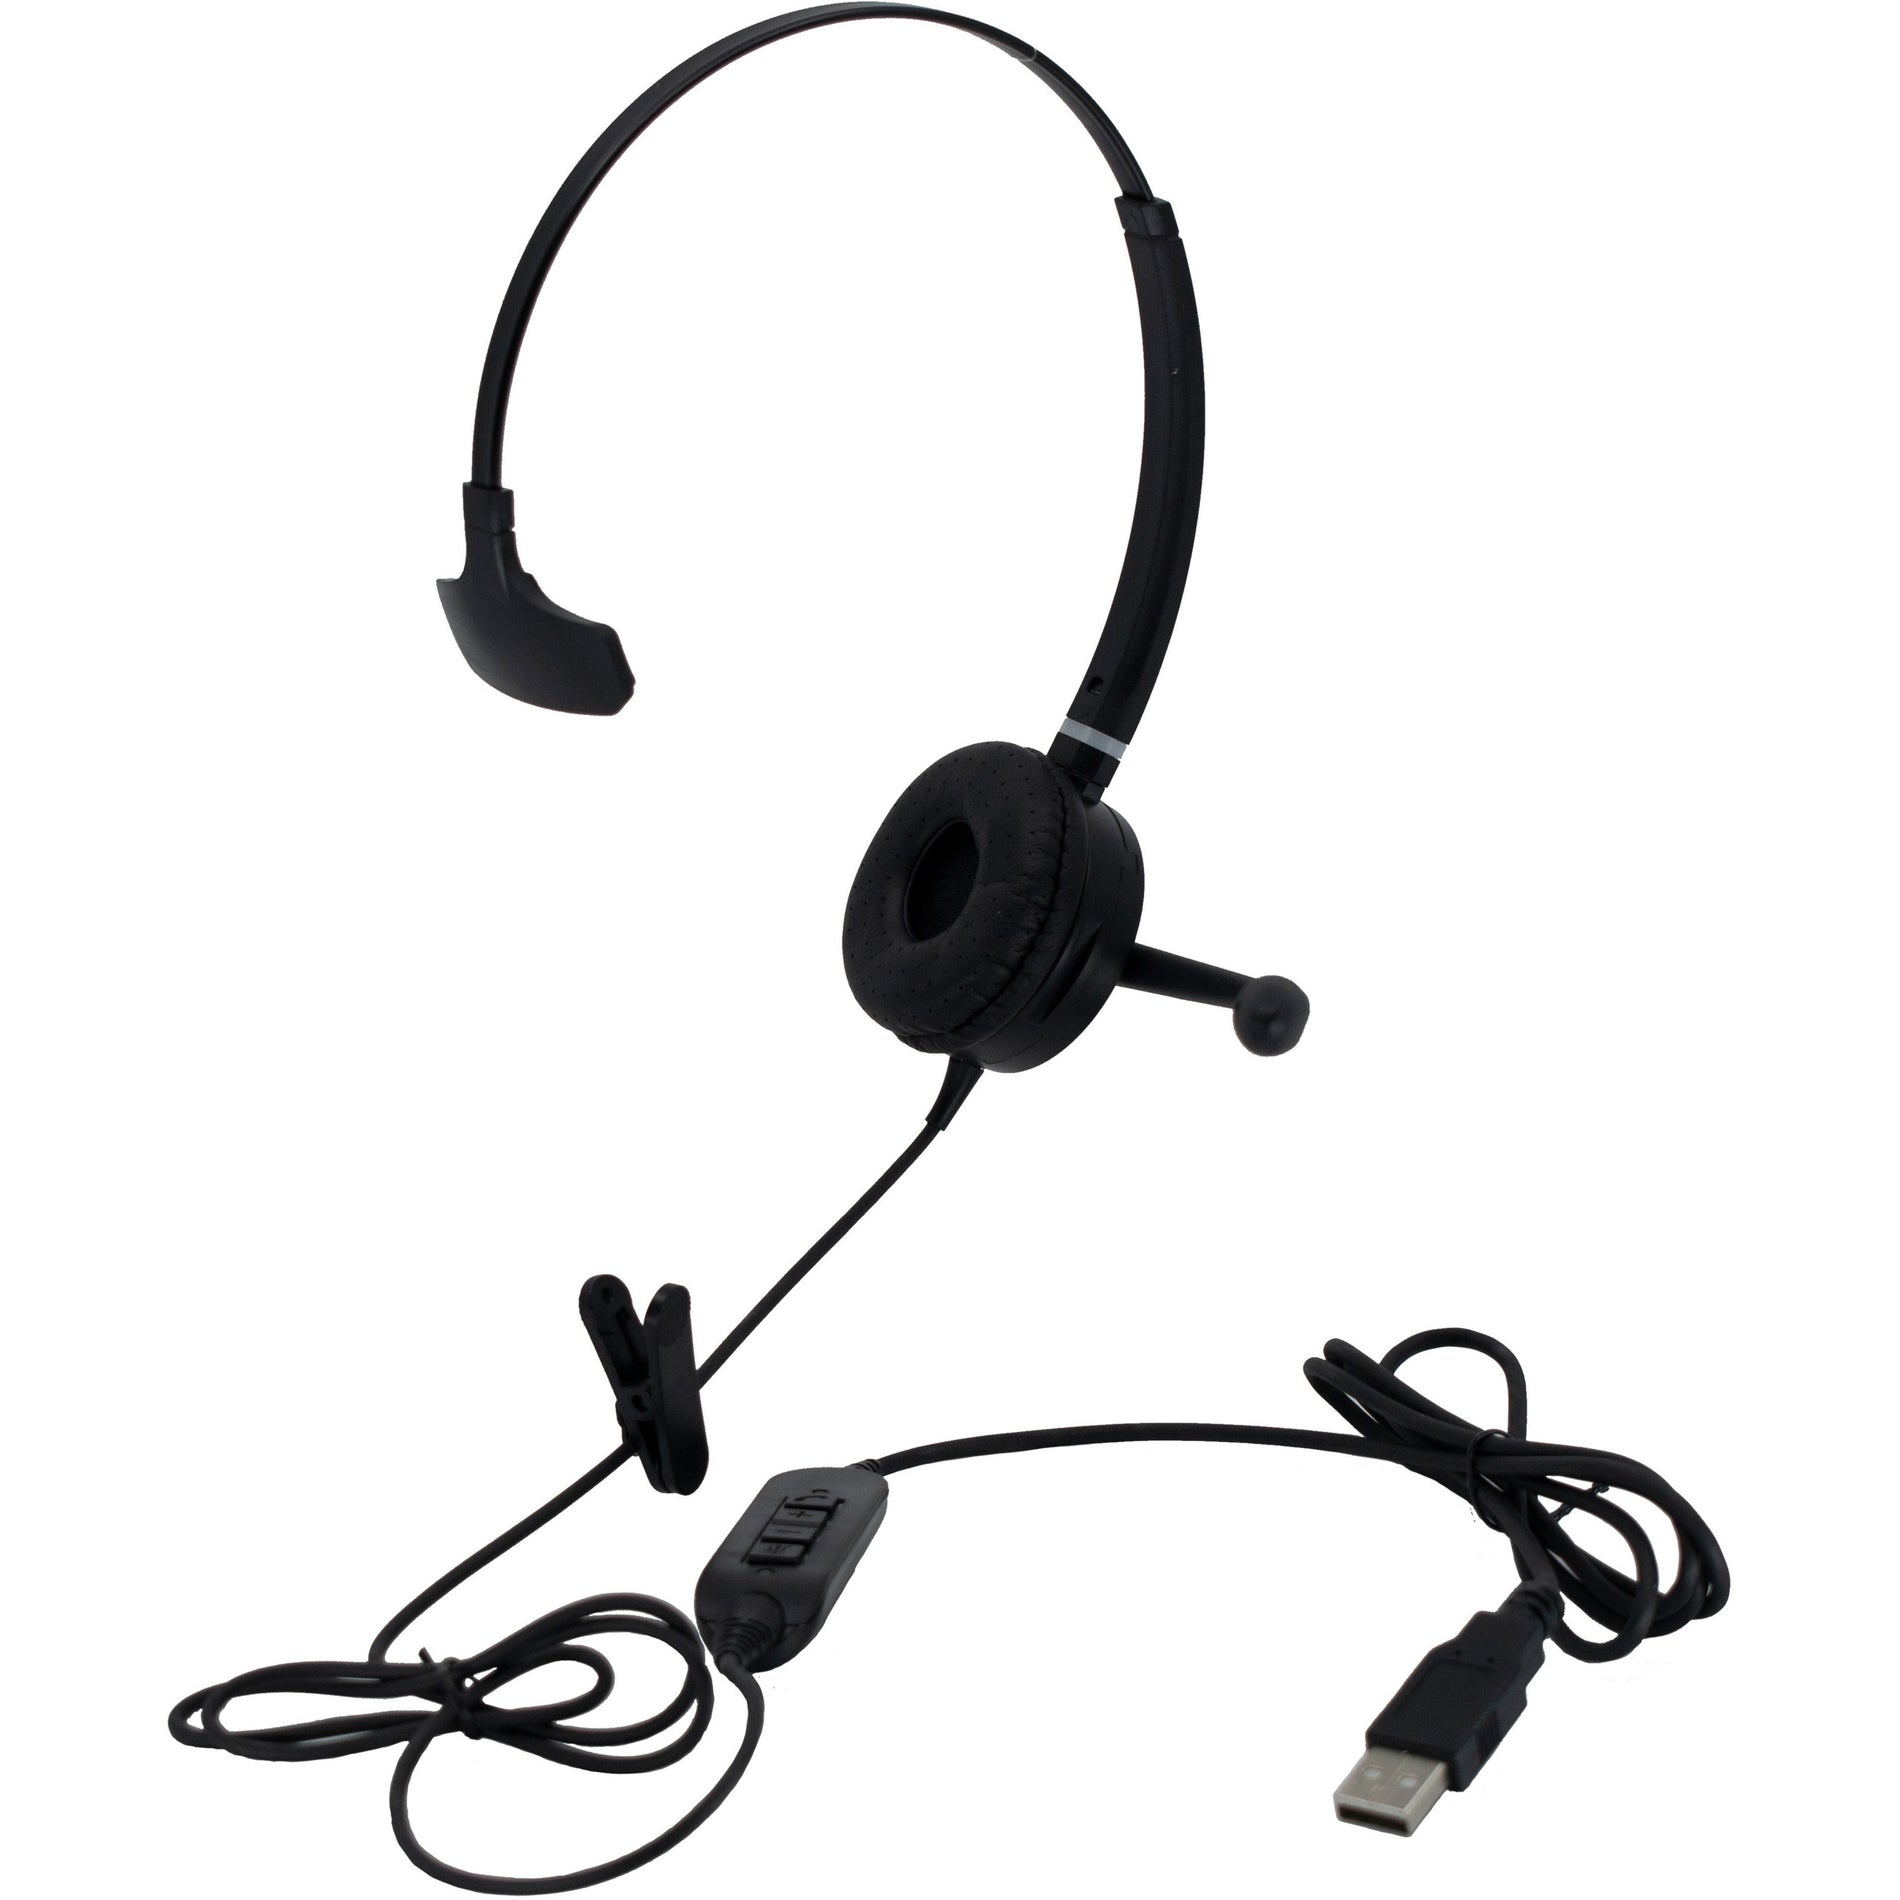 Spracht HS-WD-USB-1 Headset, Mono Sound, Noise Canceling, USB Wired